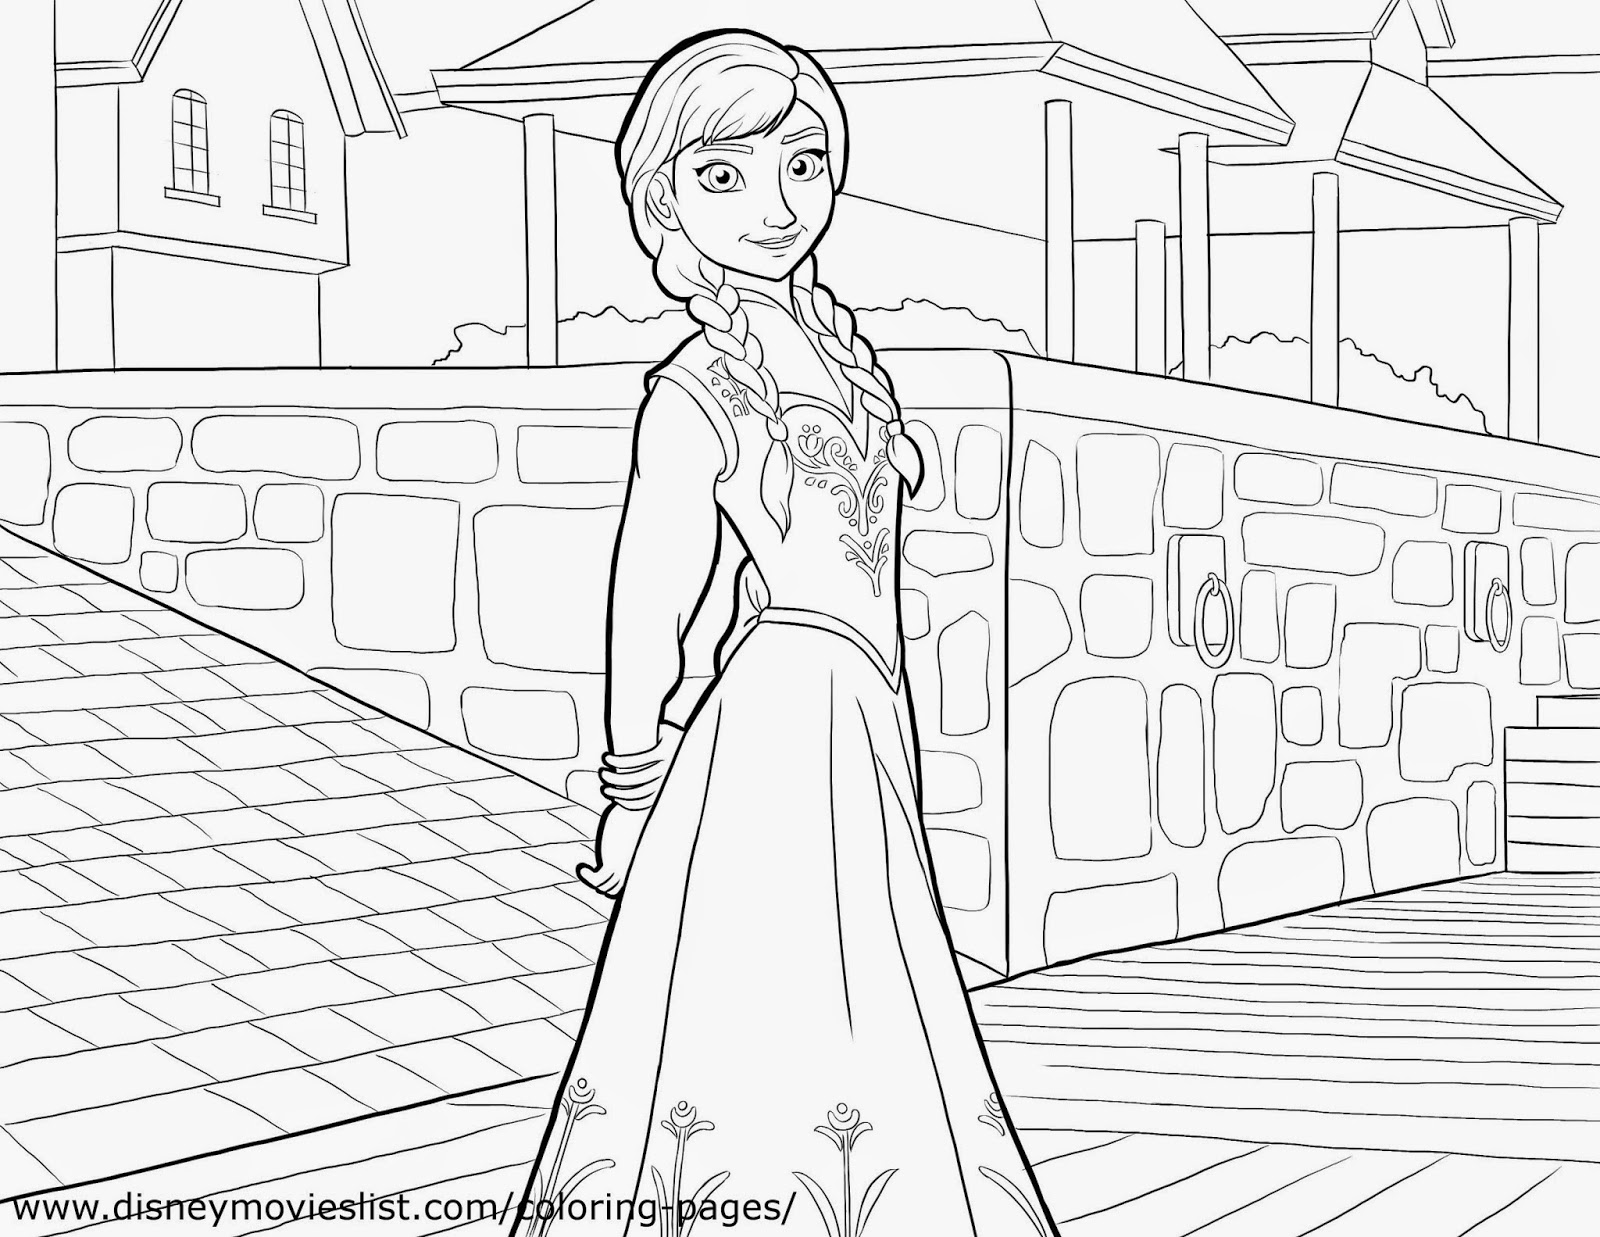 Coloring Pages Disneys Frozen Coloring Pages 2904 The Best Porn Website